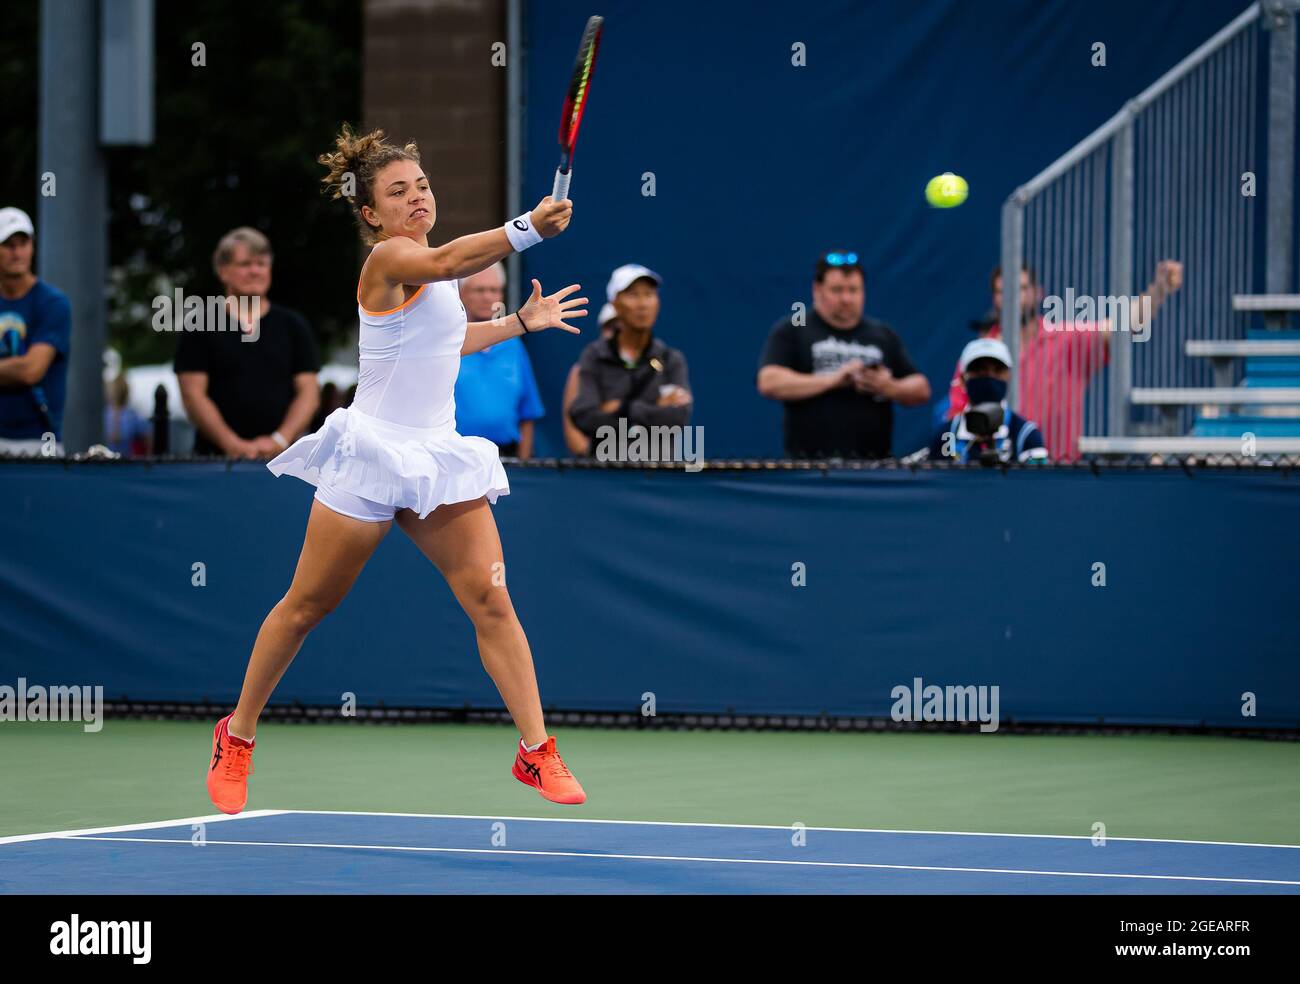 Jasmine Paolini of Italy in action during the first round of the 2021 Western and Southern Open WTA 1000 tennis tournament against Veronika Kudermetova of Russia on August 17, 2021 at Lindner